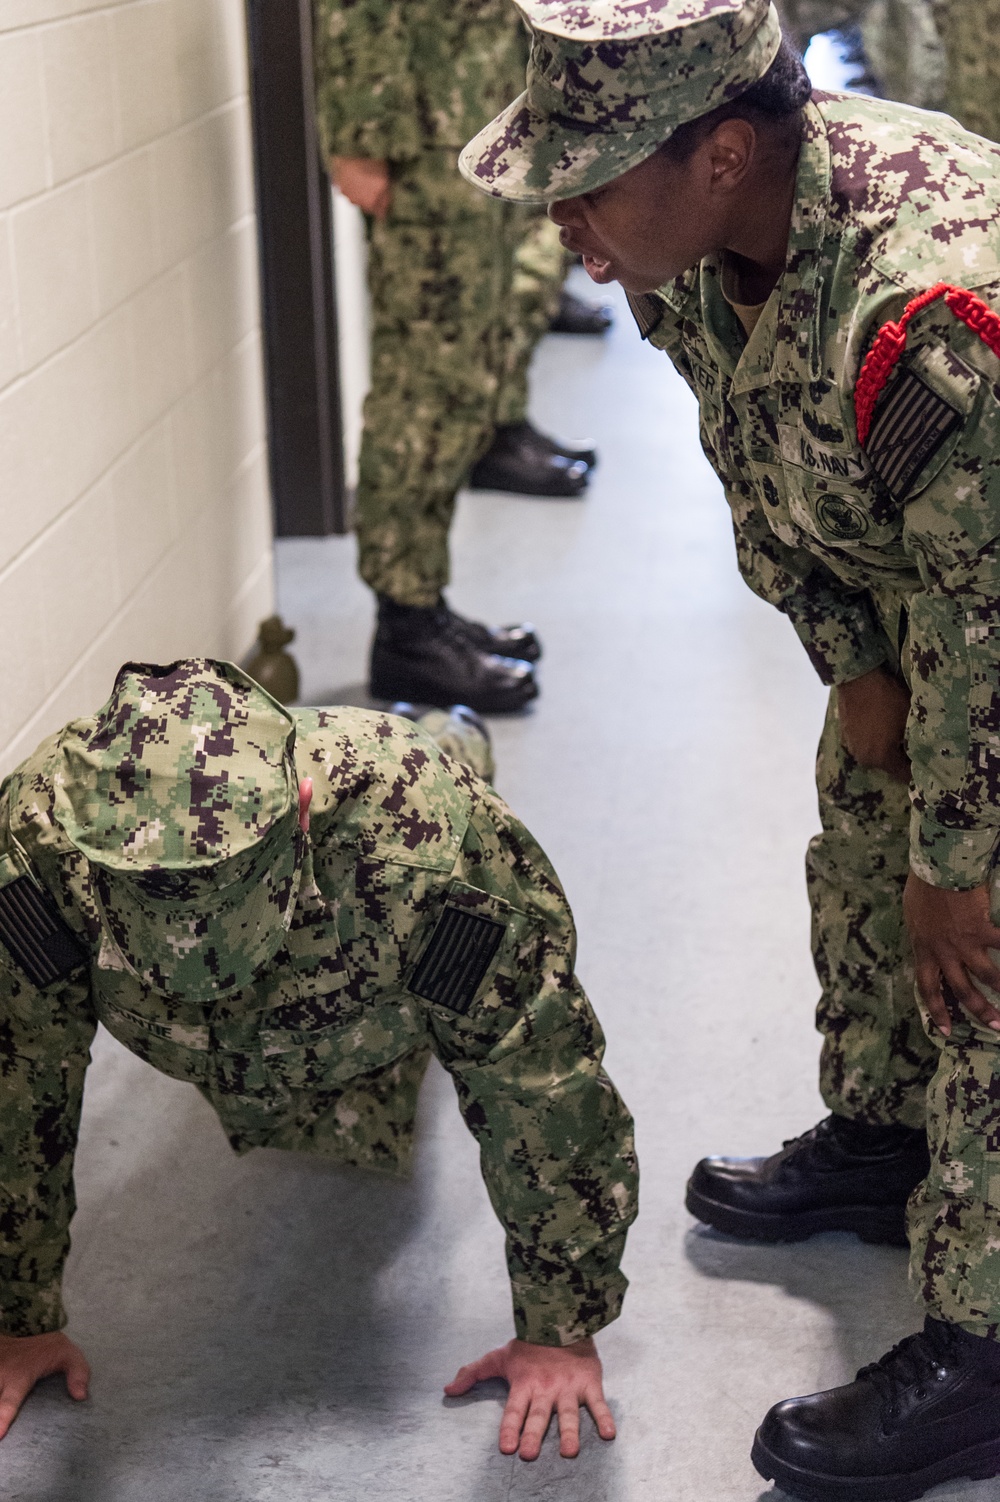 191115-N-TE695-0002 NEWPORT, R.I. (Oct. 31, 2019) -- Navy Officer Candidate School conducts a uniform inspection